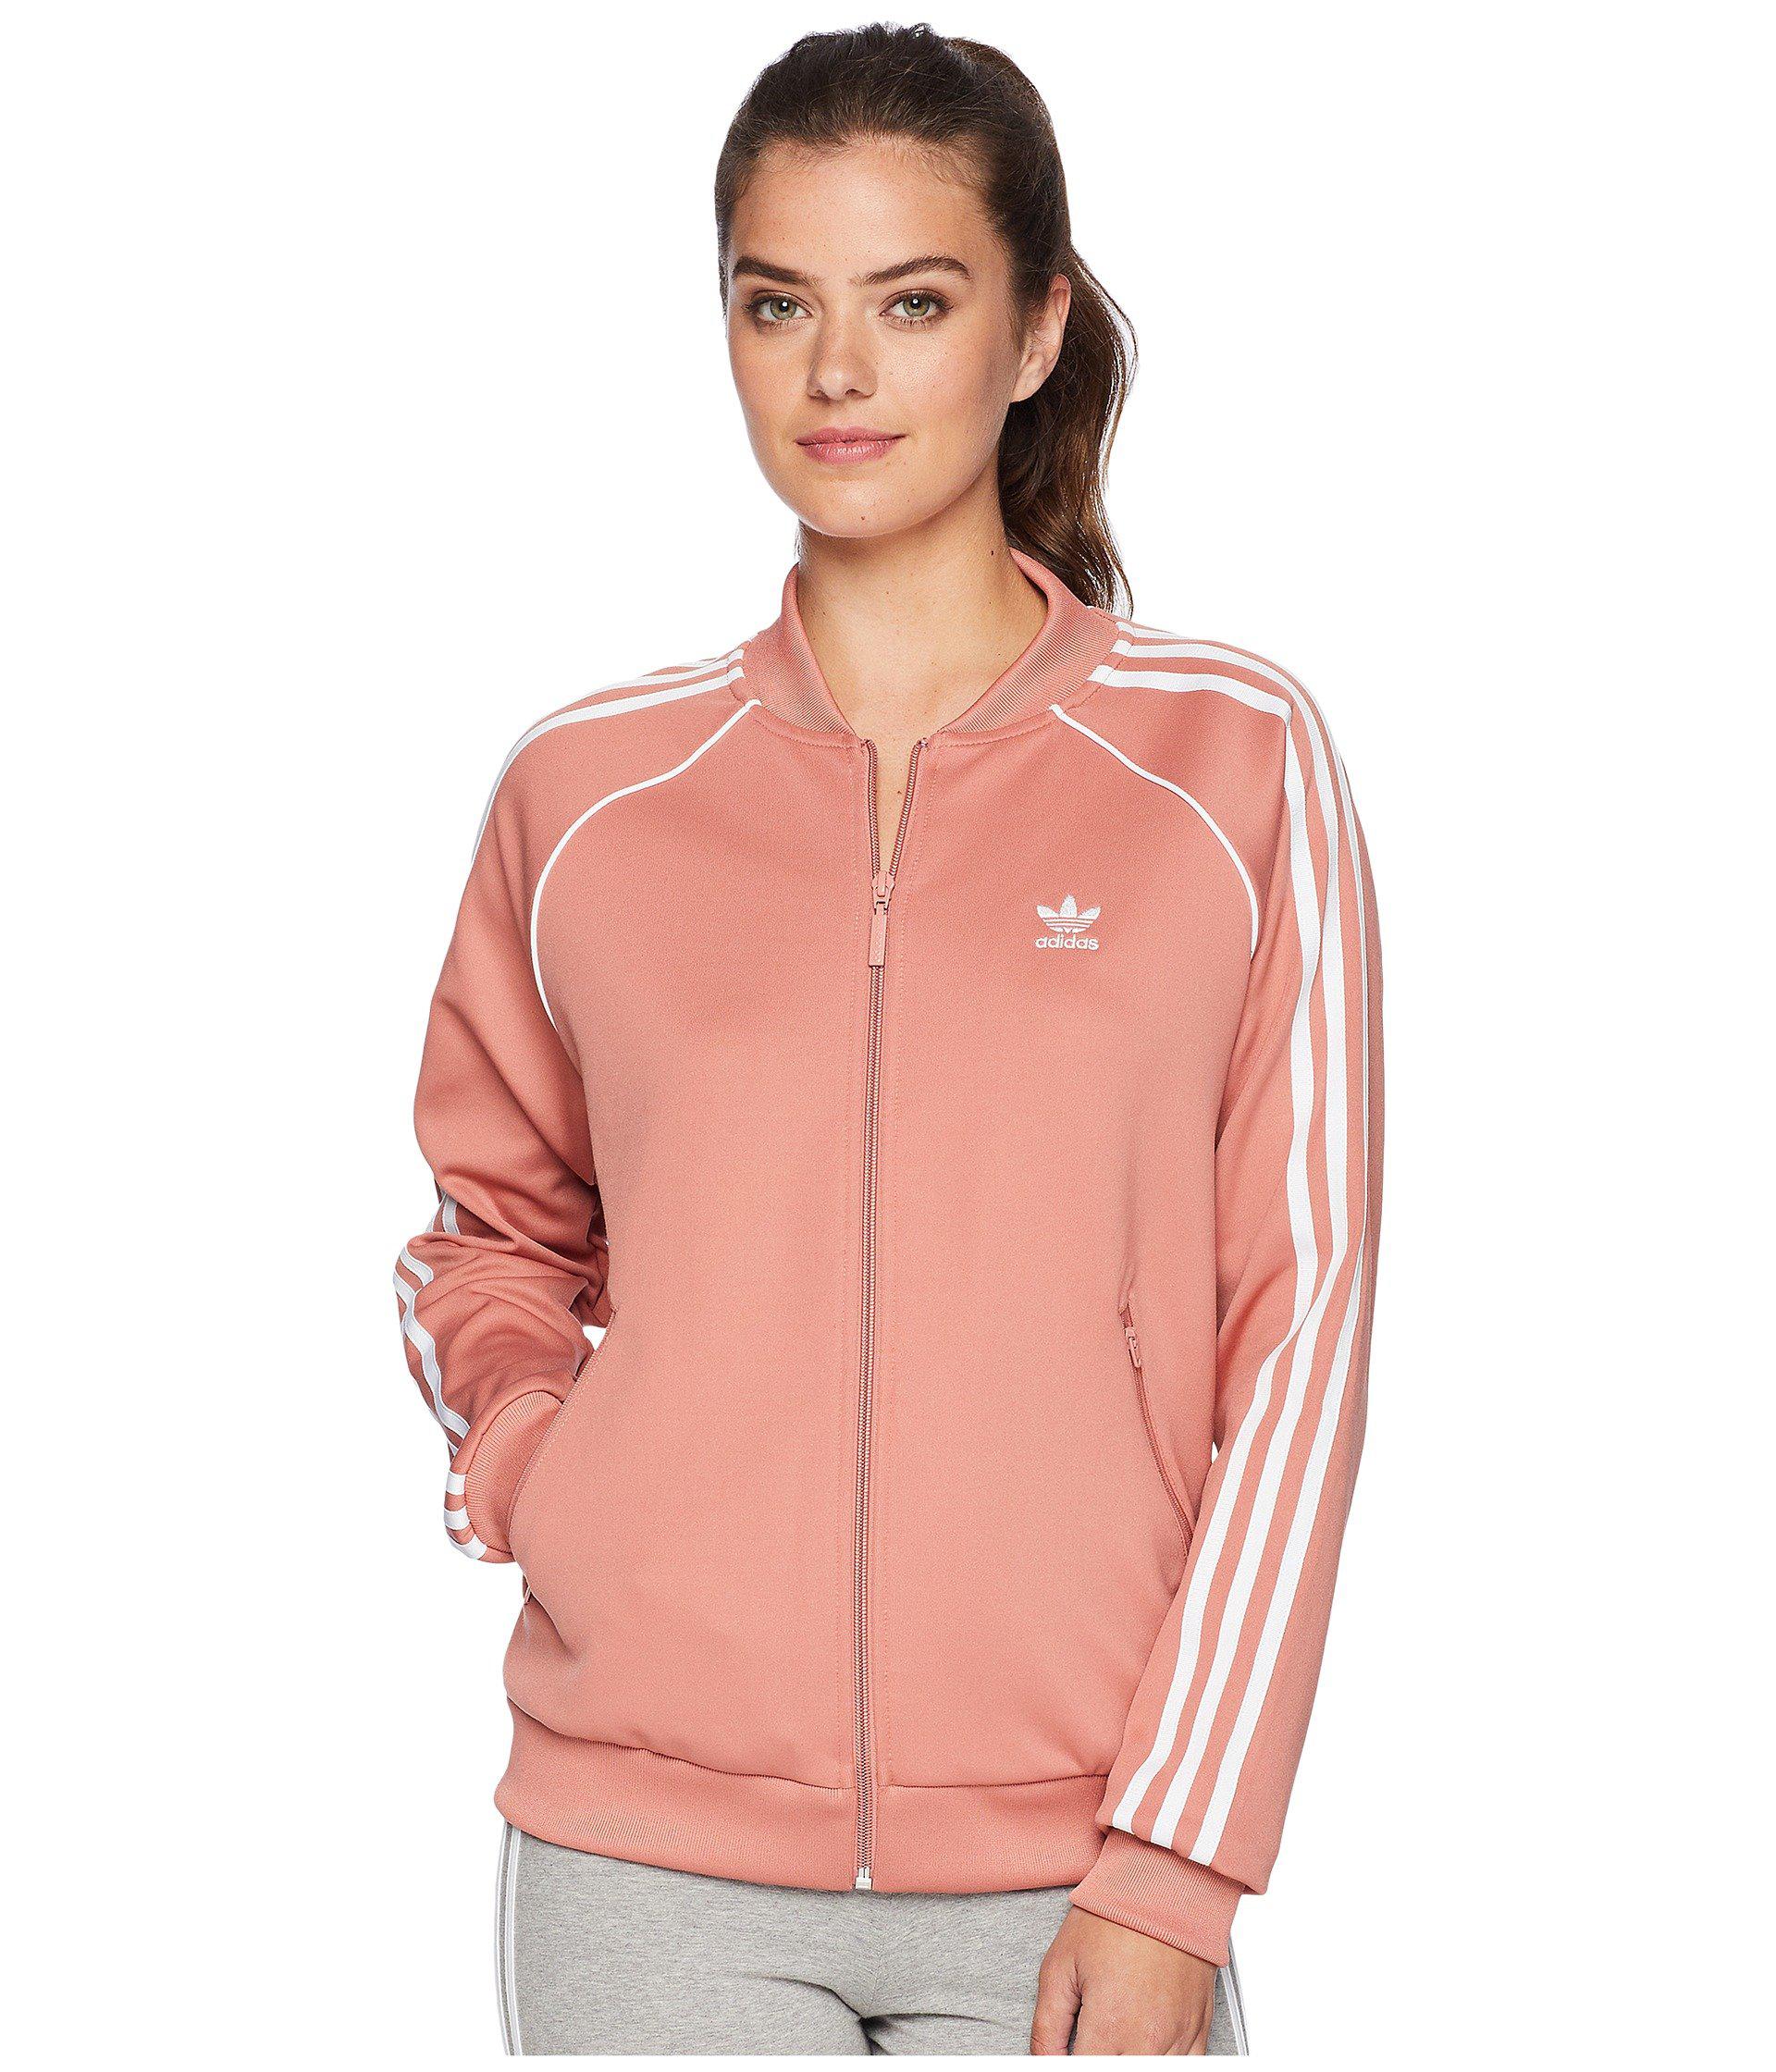 adidas Originals Synthetic Sst Track Jacket in Ash Pink (Pink) - Lyst